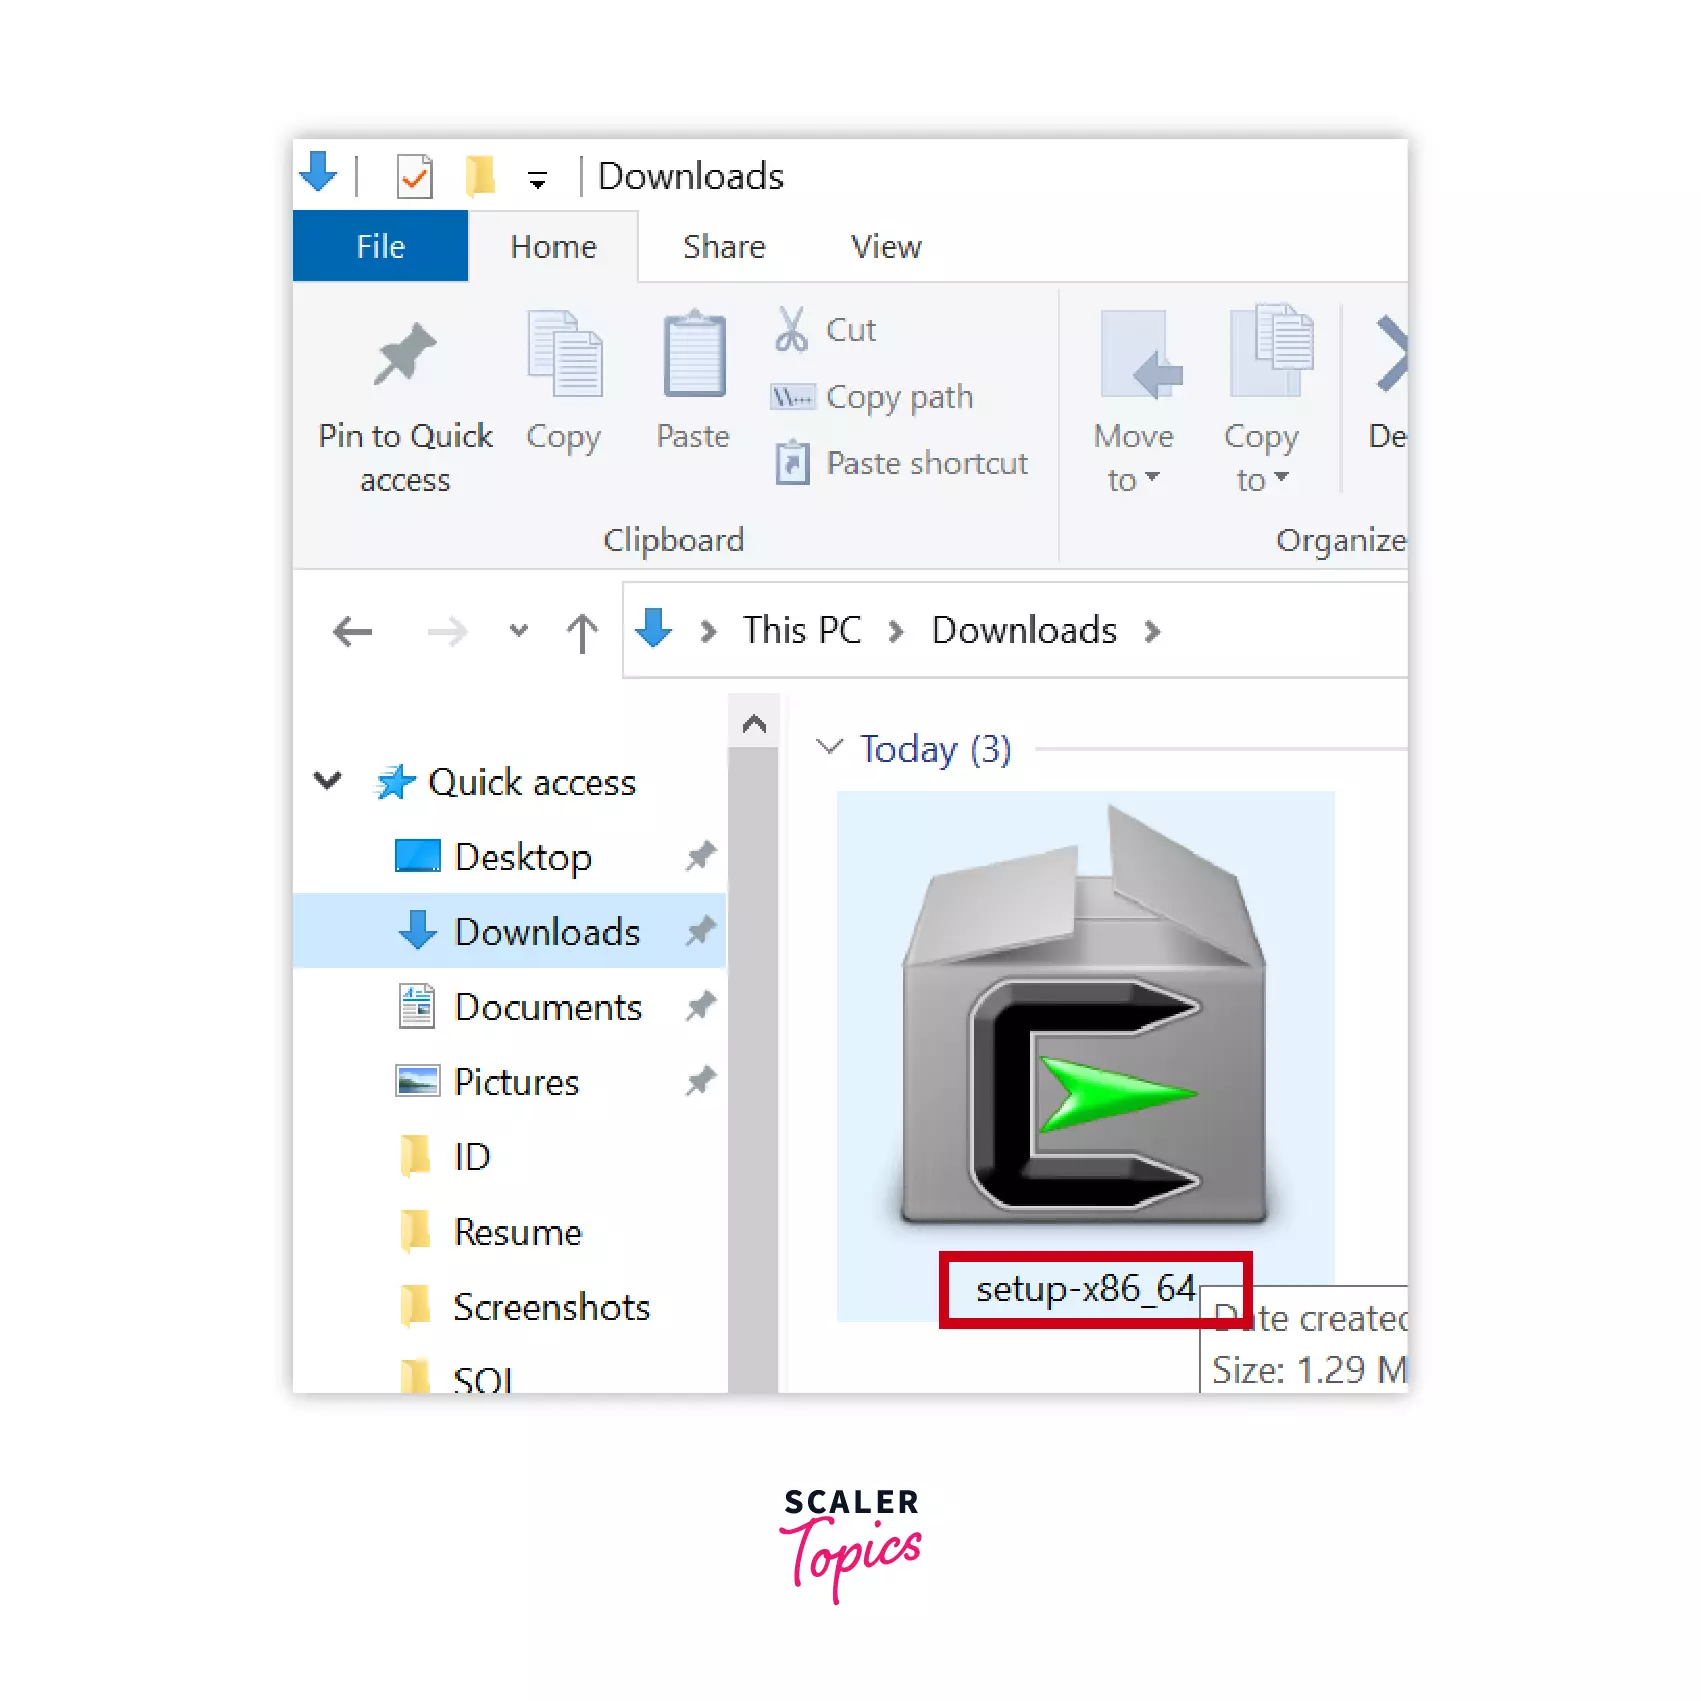 Locating the file on your computer